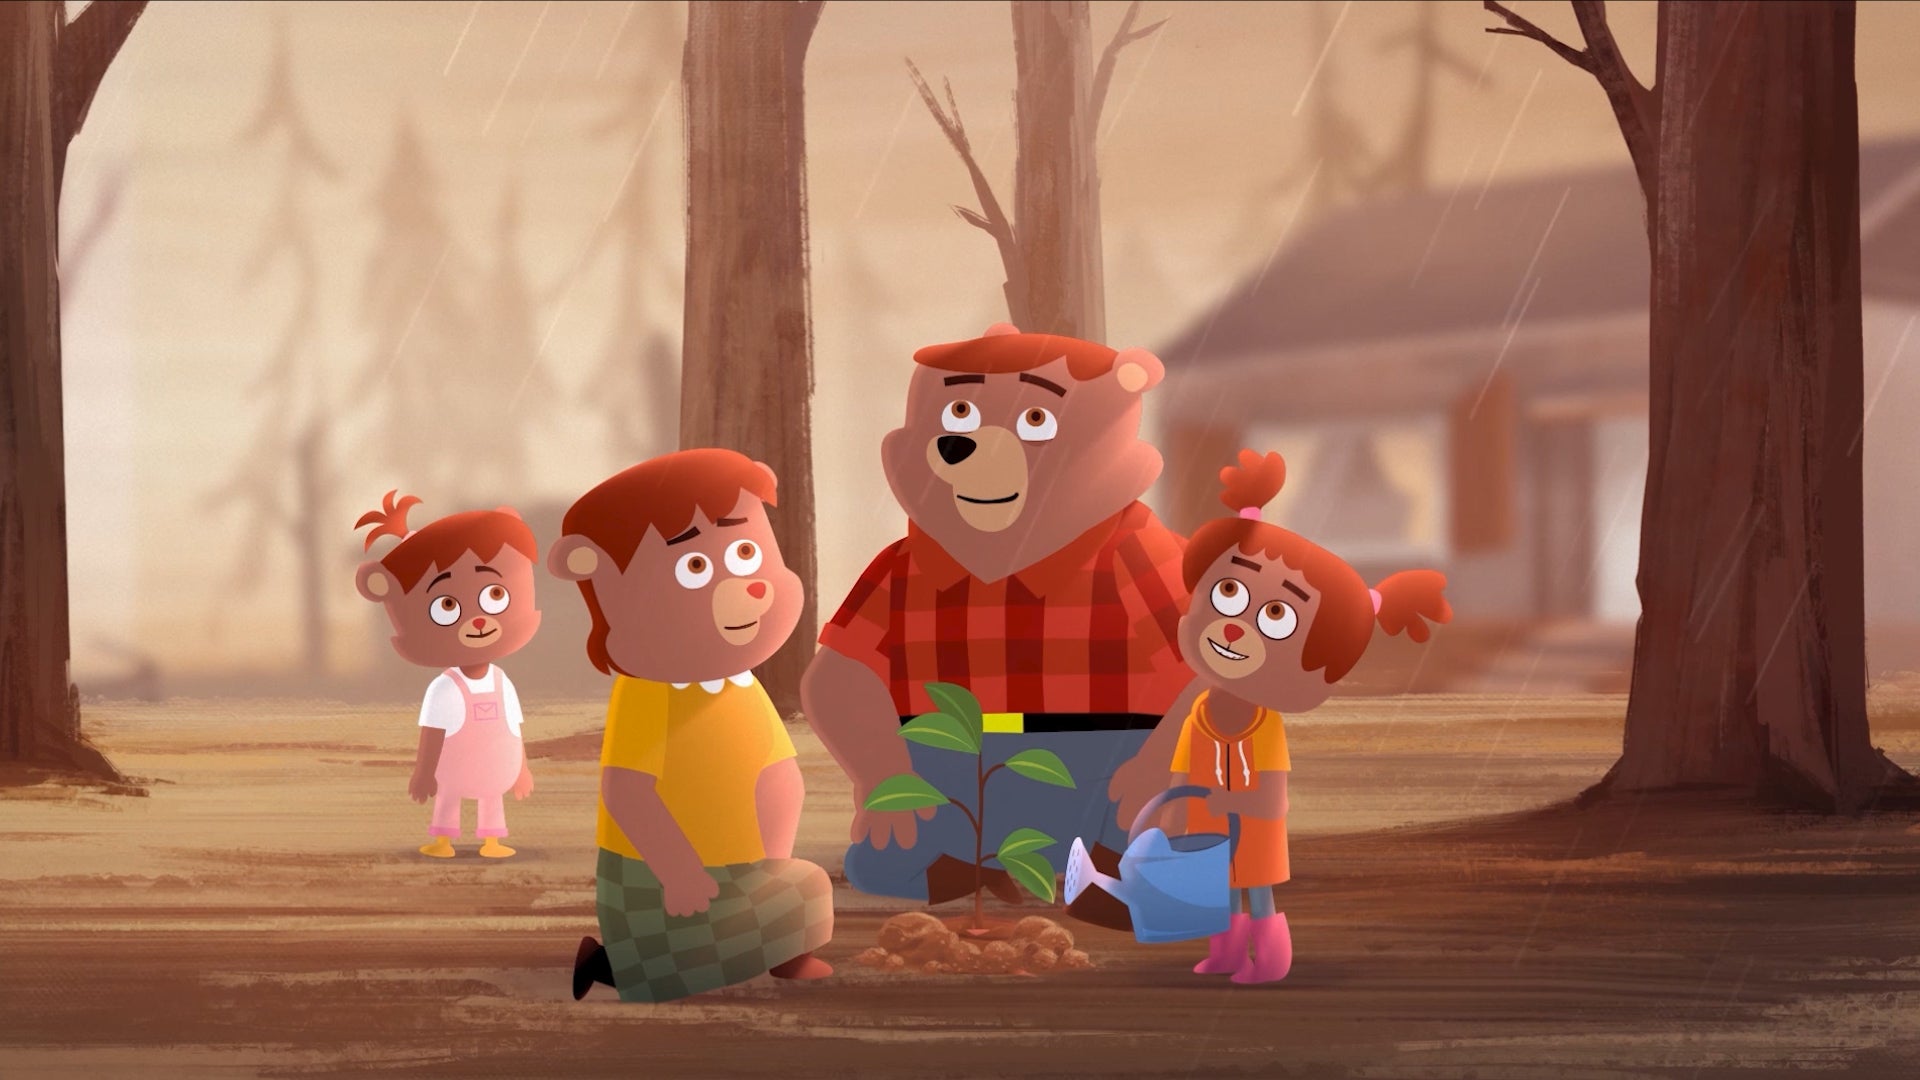 Family of cartoon bears standing in a forest after a fire has burned most of the trees.